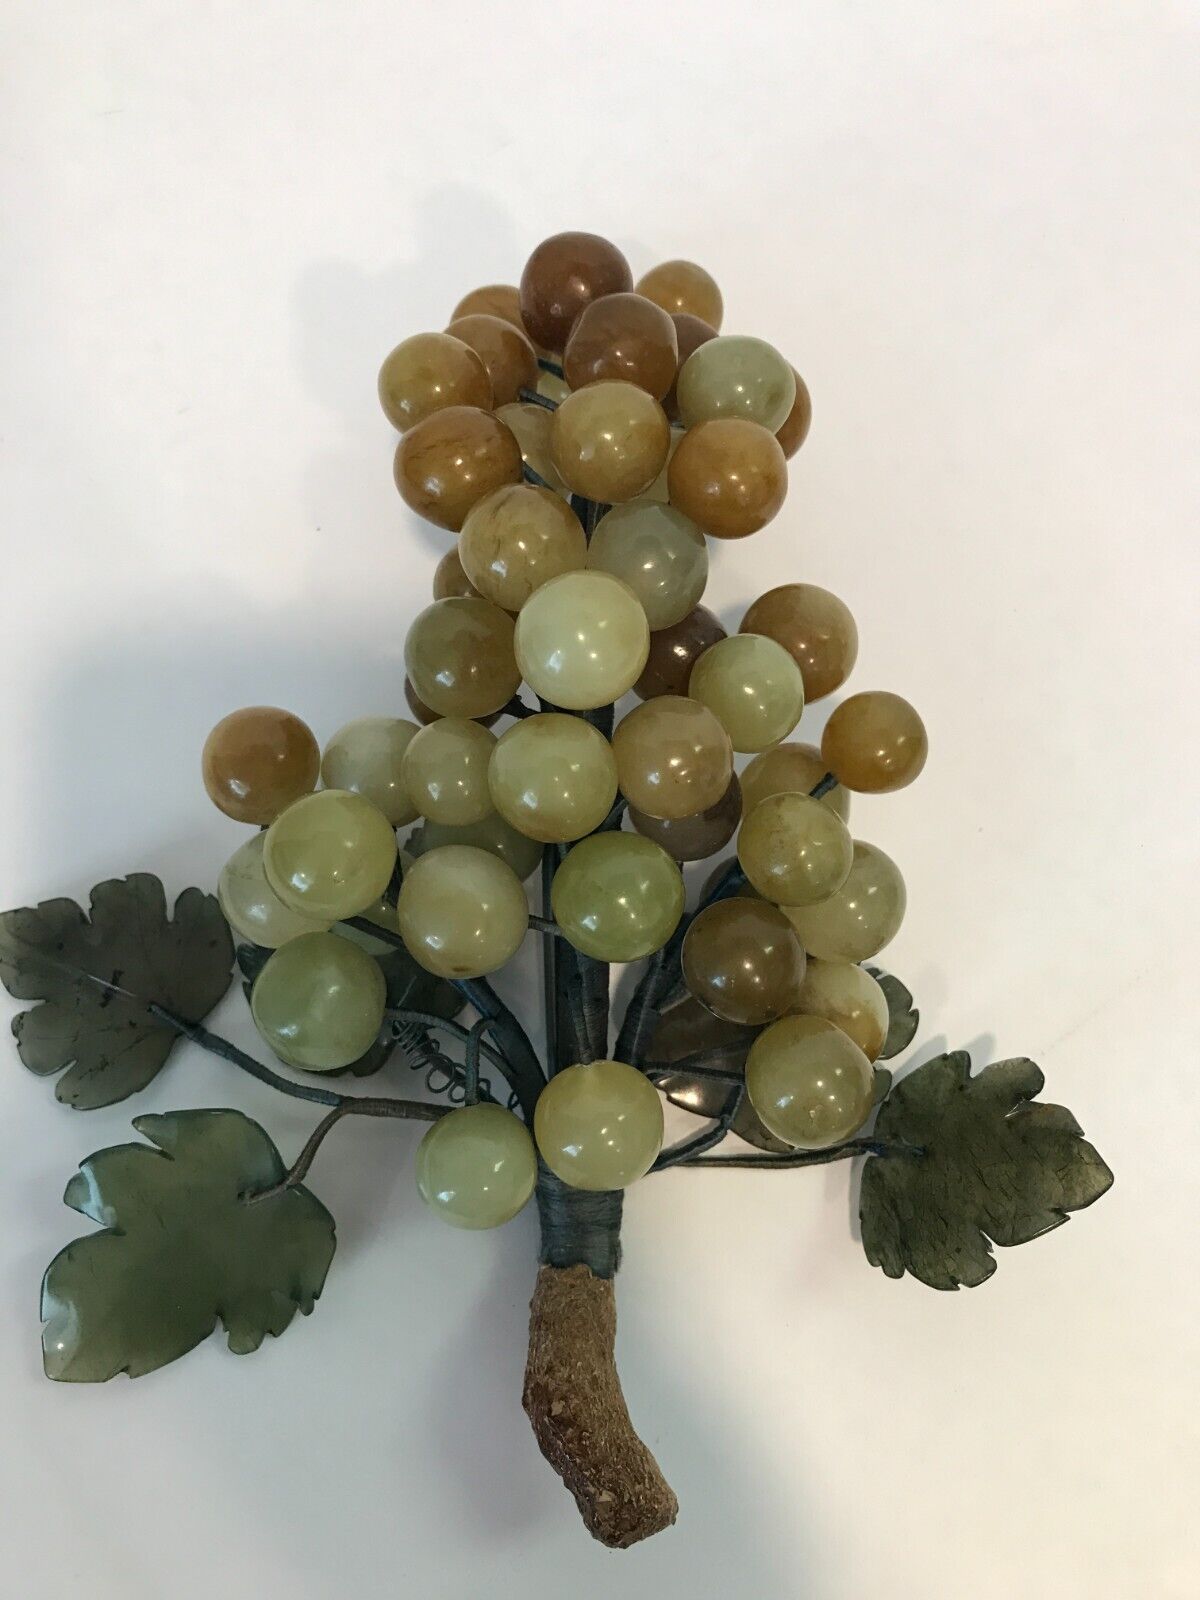 Jade Alabaster Stone Marble Onyx Grape Cluster with 5 Stone Leaves